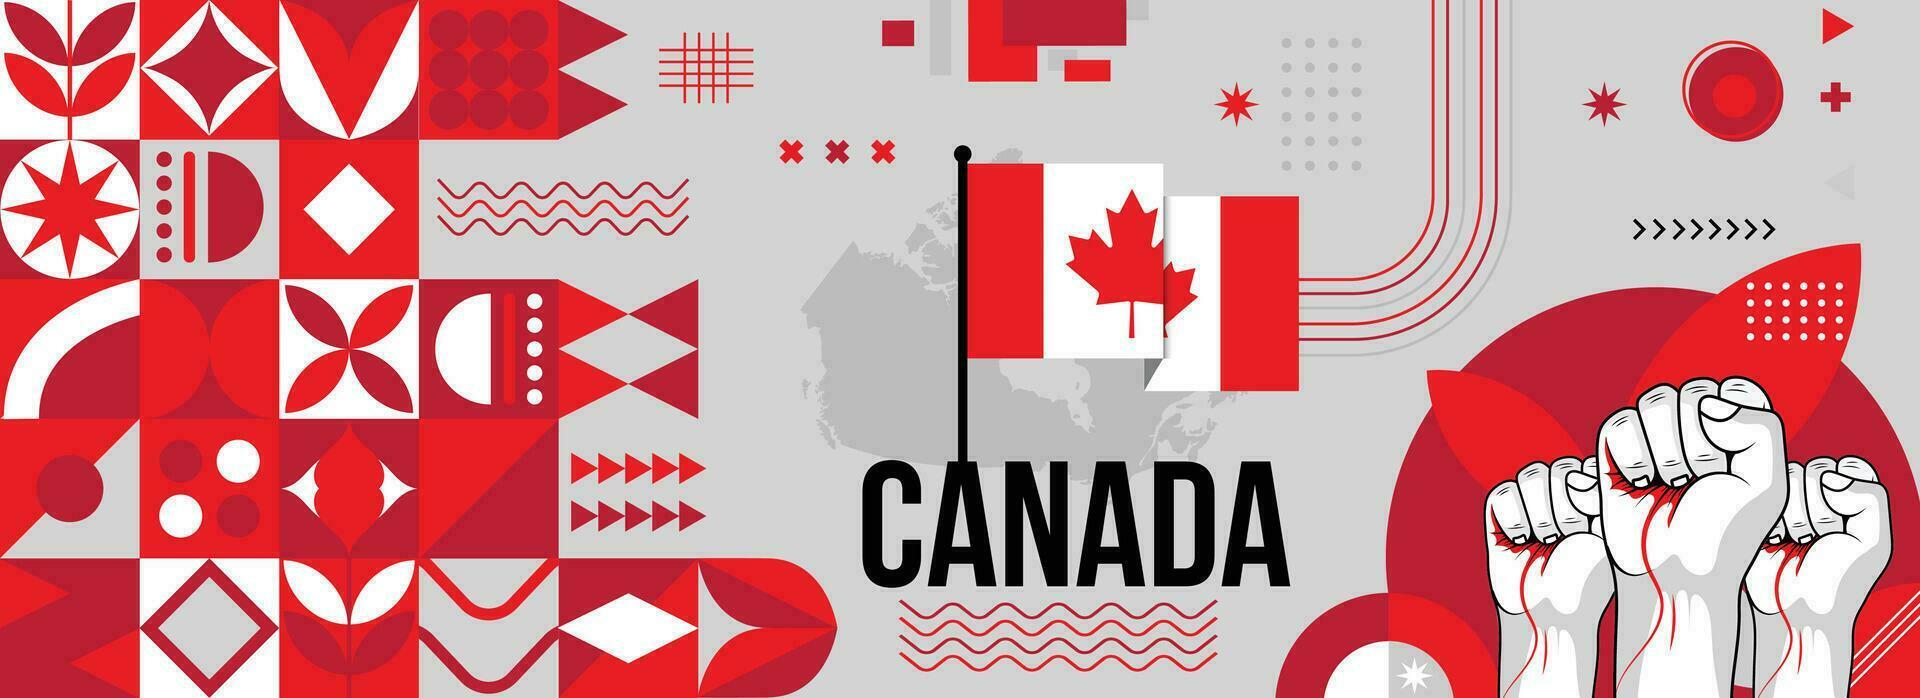 Canada national or independence day banner for country celebration. Flag and map of Canadians with raised fists. Modern retro design with typorgaphy abstract geometric icons. Vector illustration